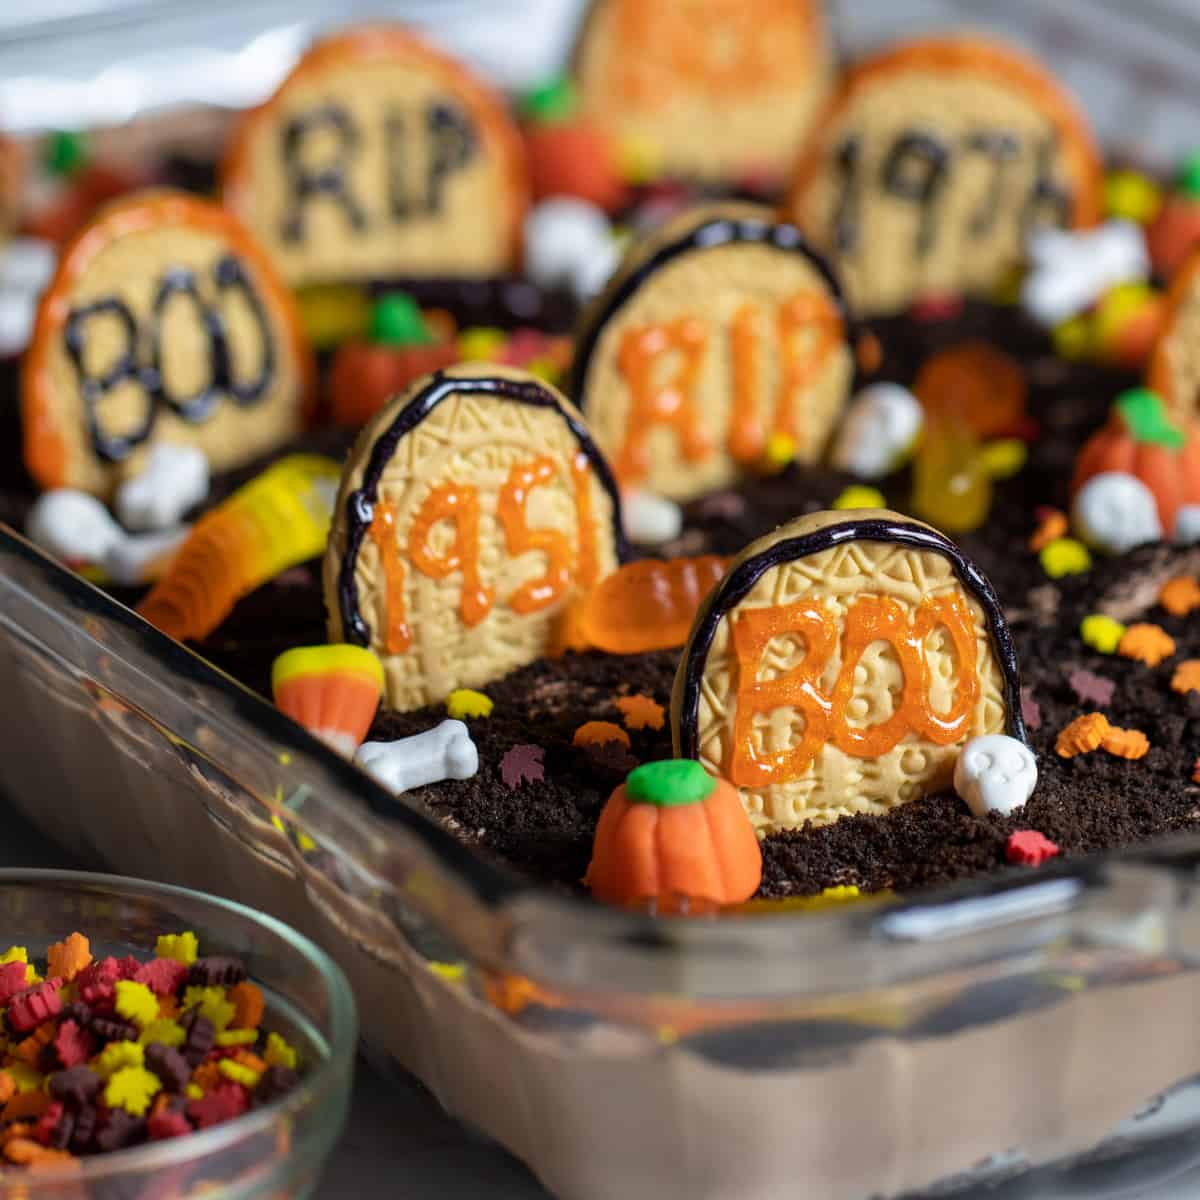 A close up picture of the Halloween graveyard dessert.